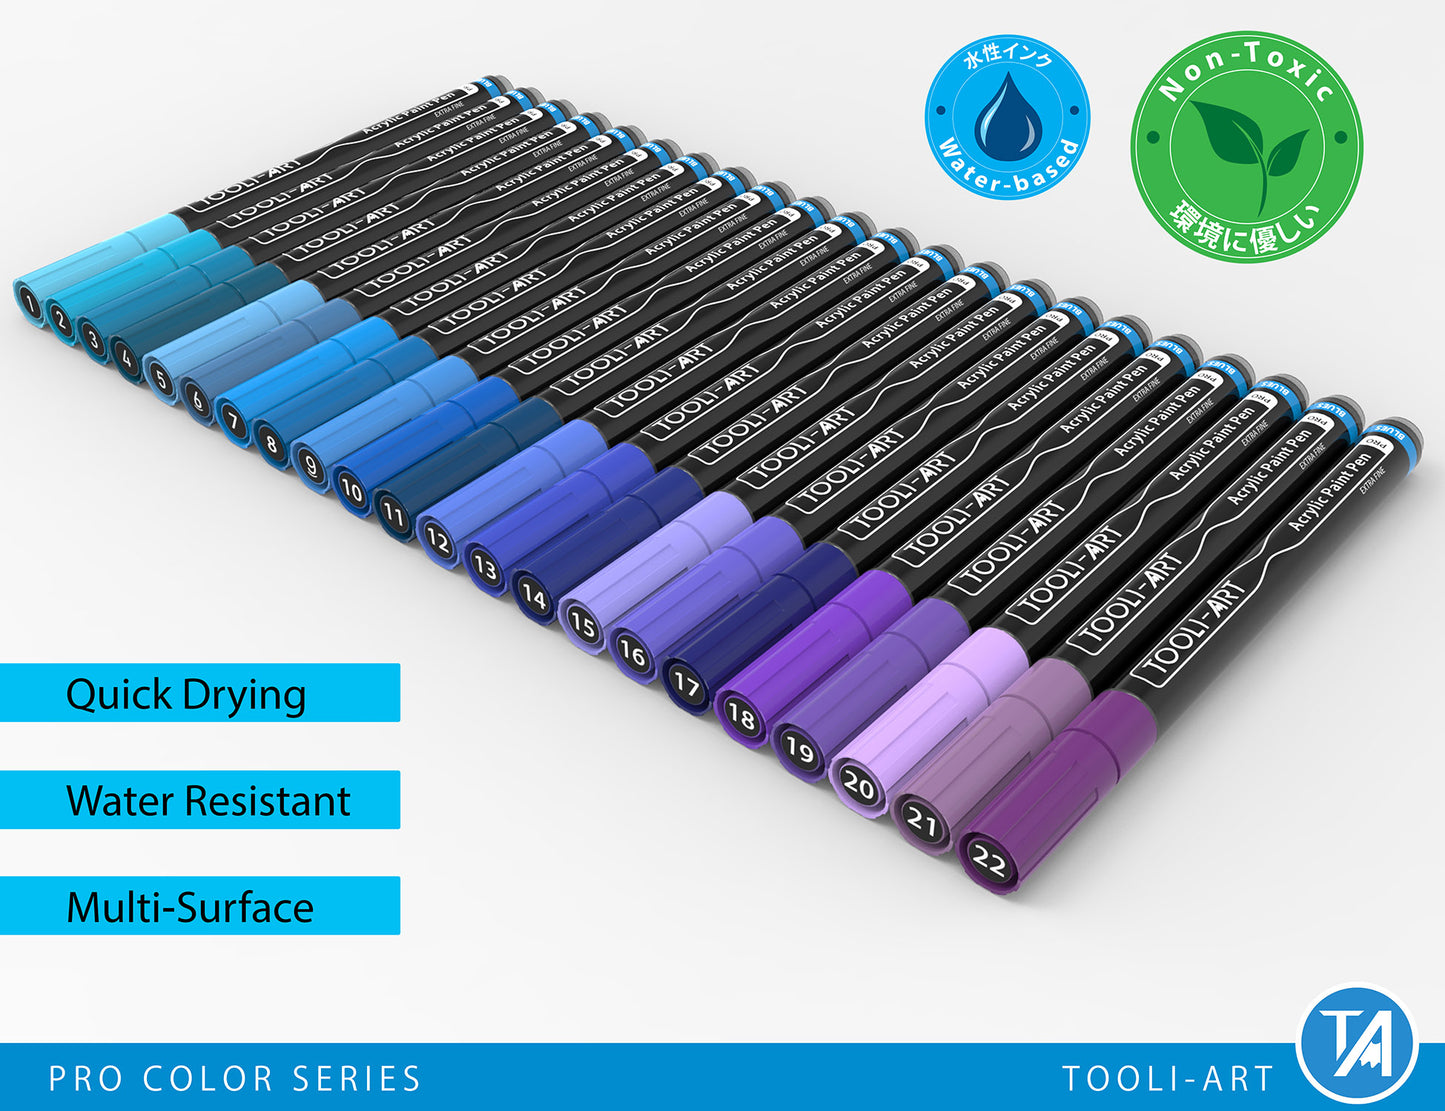 Acrylic Paint Pens 22 Assorted Blue And Purple Pro Color Series Specialty Markers Set (0.7mm EXTRA FINE)